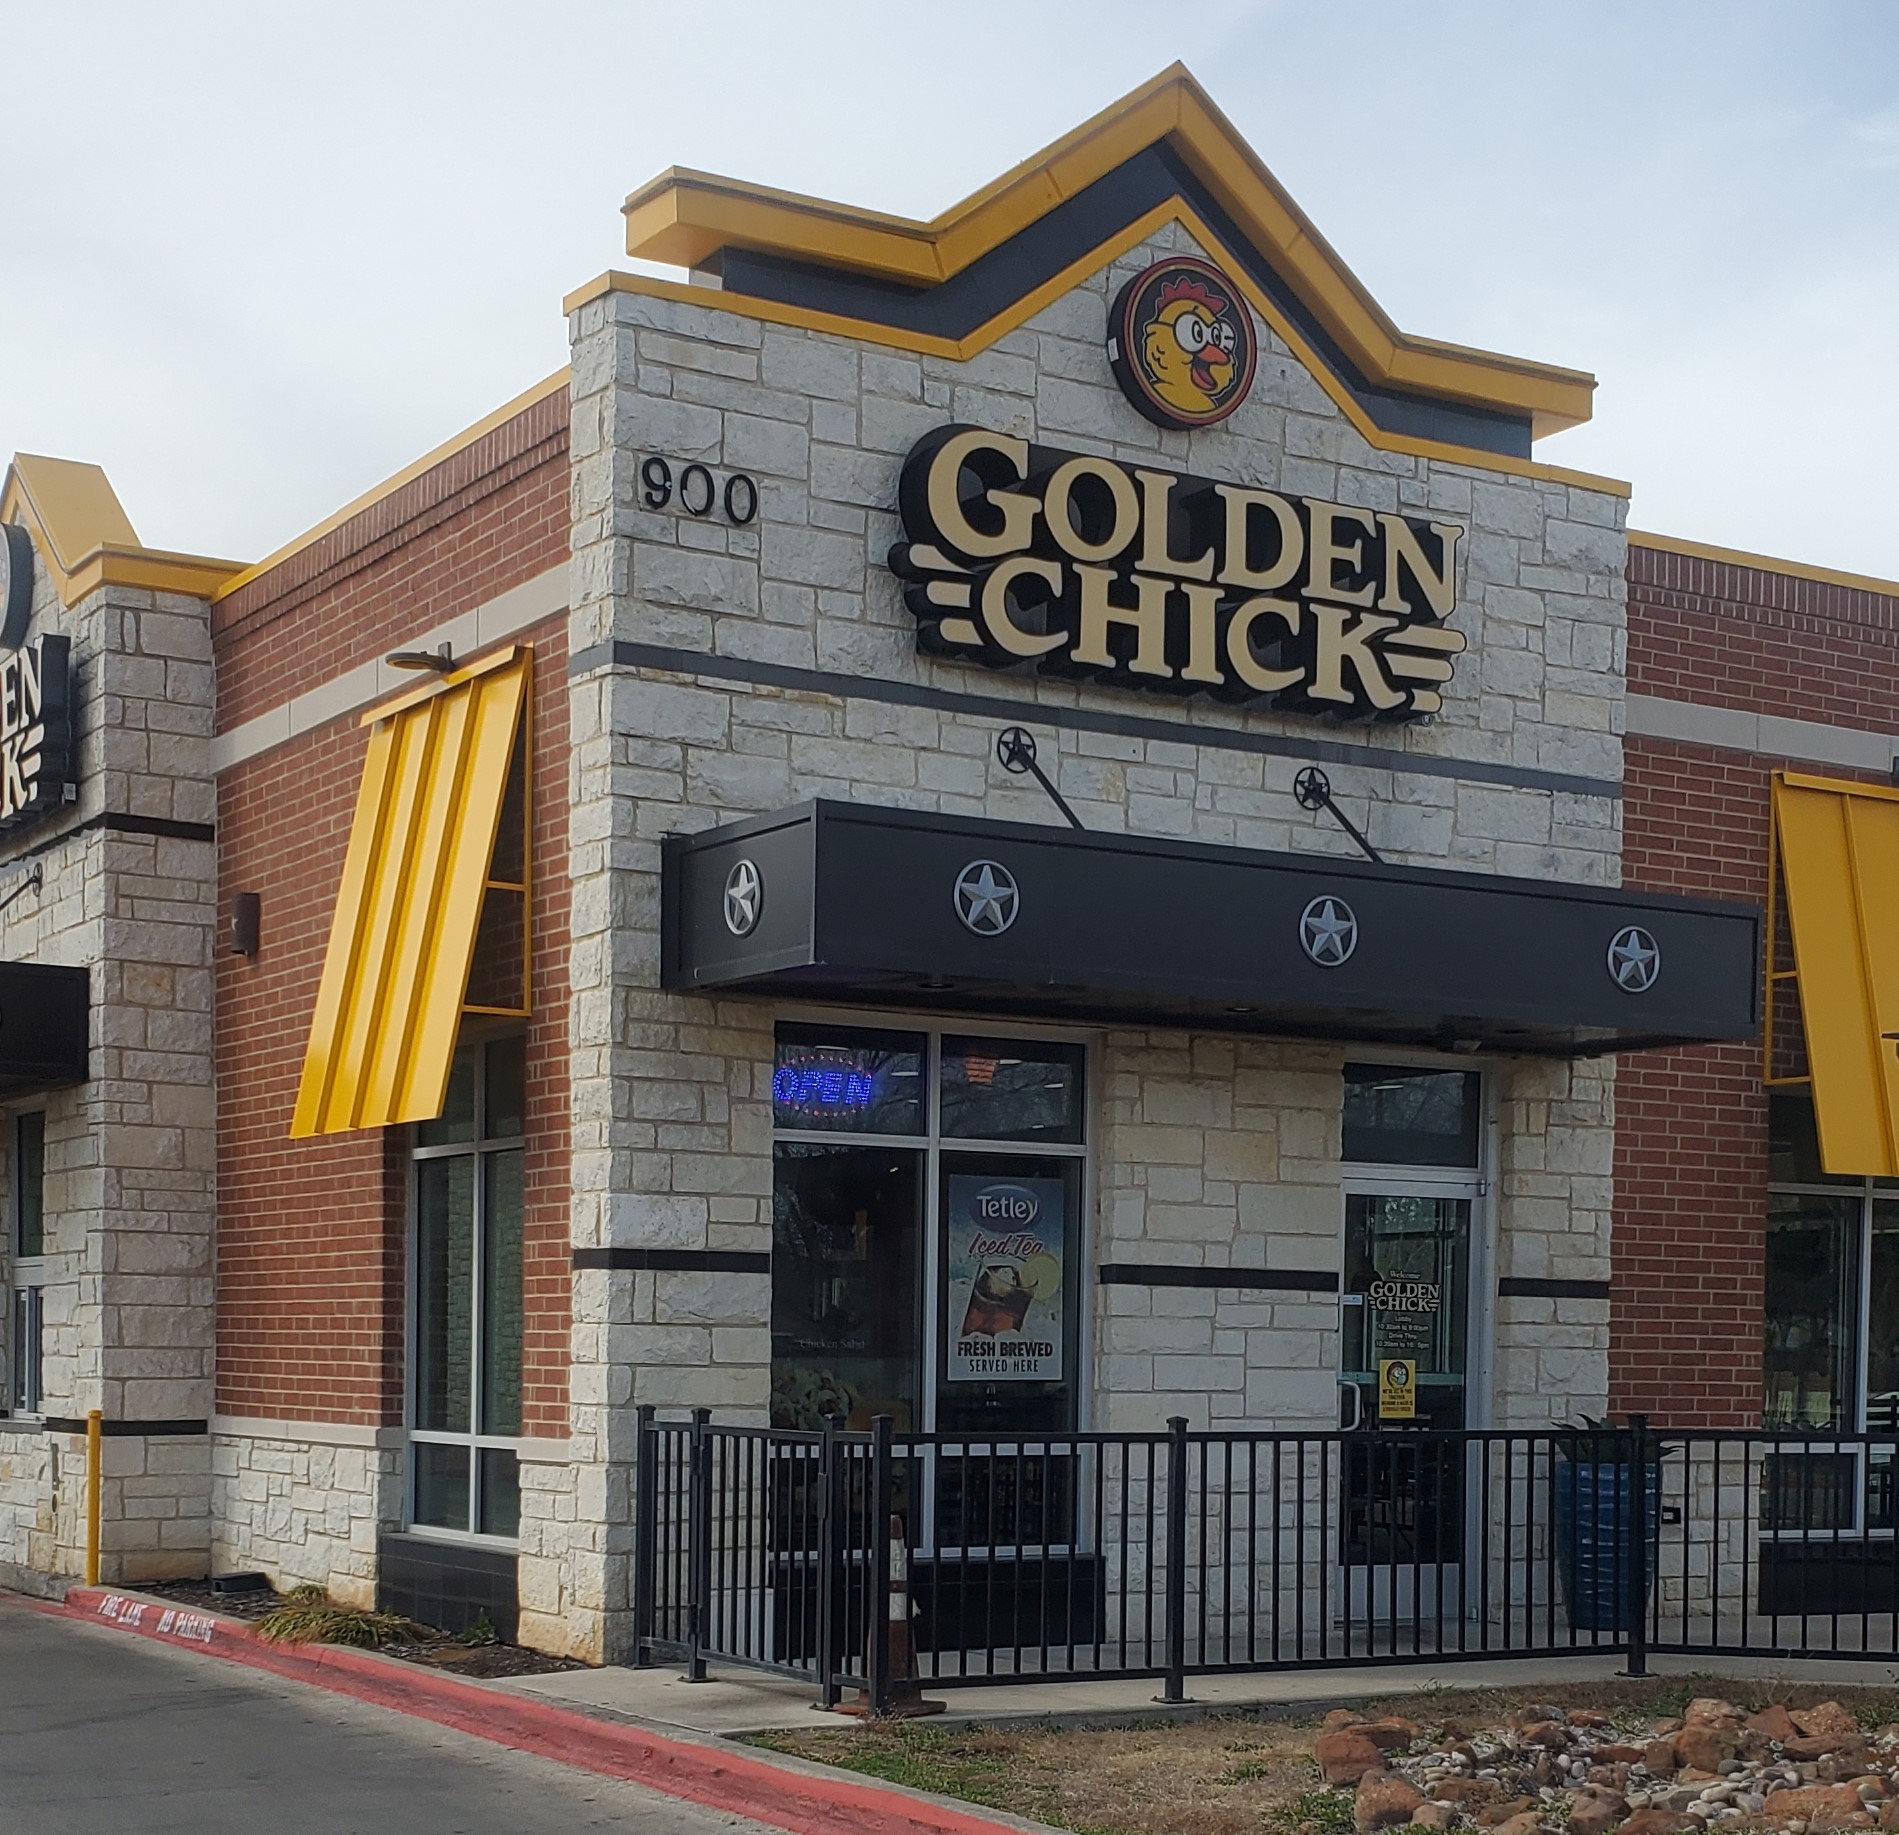 Golden Chick storefront.  Your local Golden Chick fast food restaurant in Grand Prairie, Texas